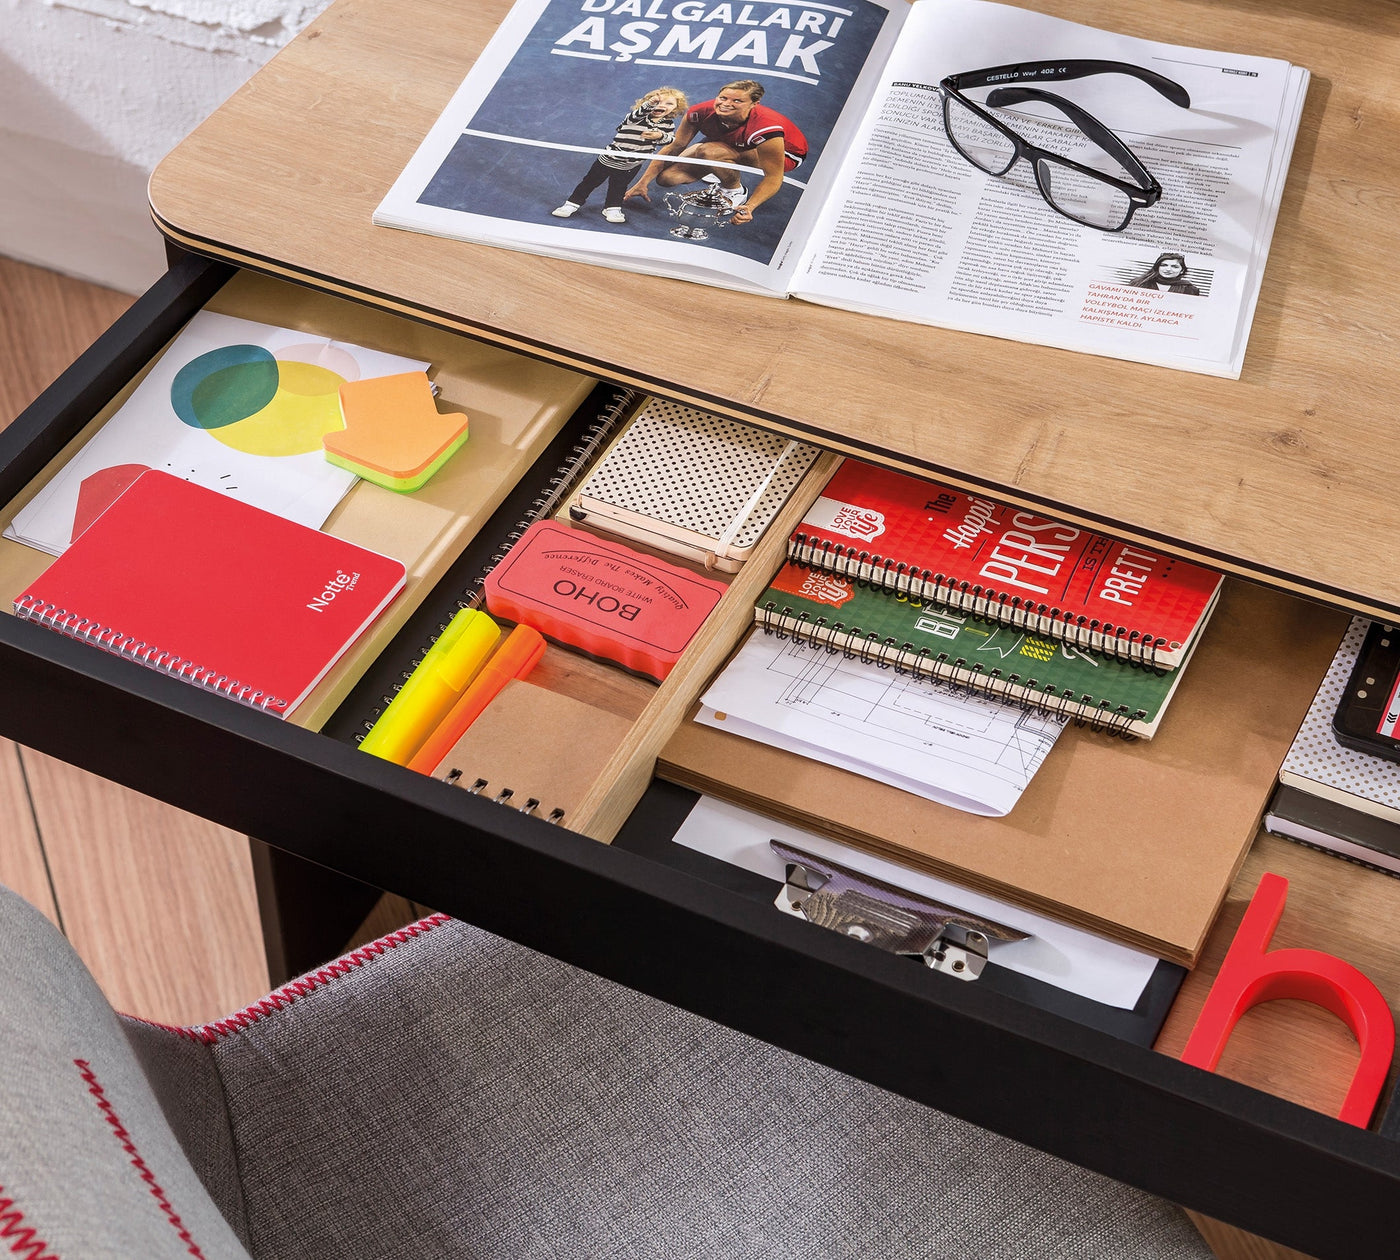 Black Small Study Desk - ON ORDER ONLY